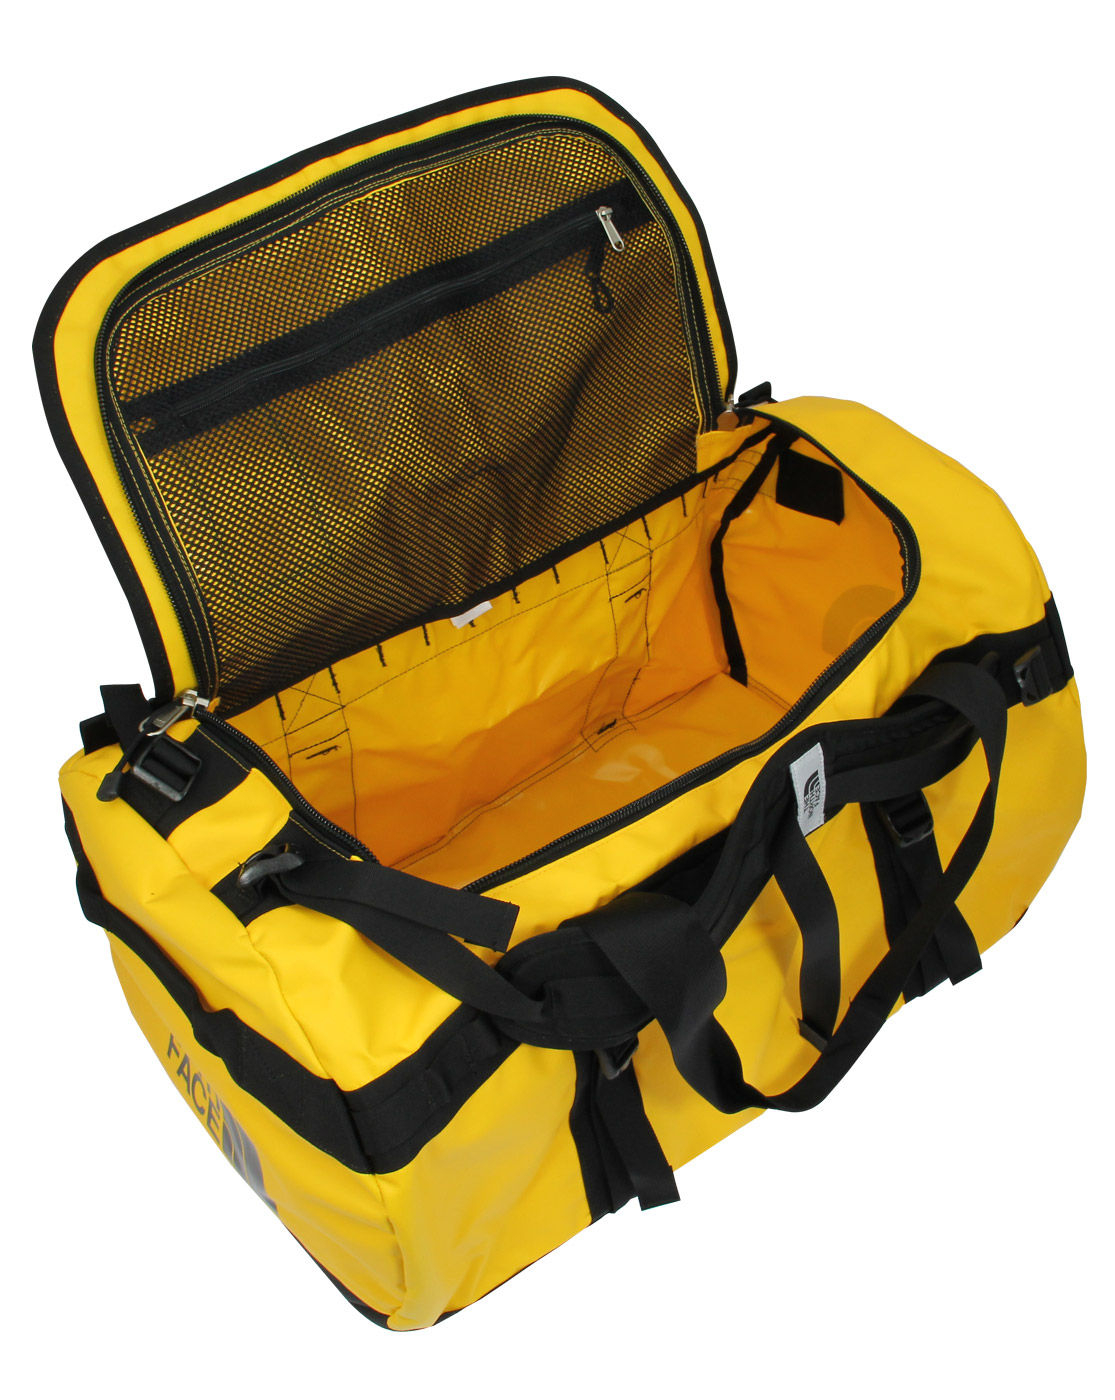 The North Face Base Camp Large Duffel Bag | IUCN Water